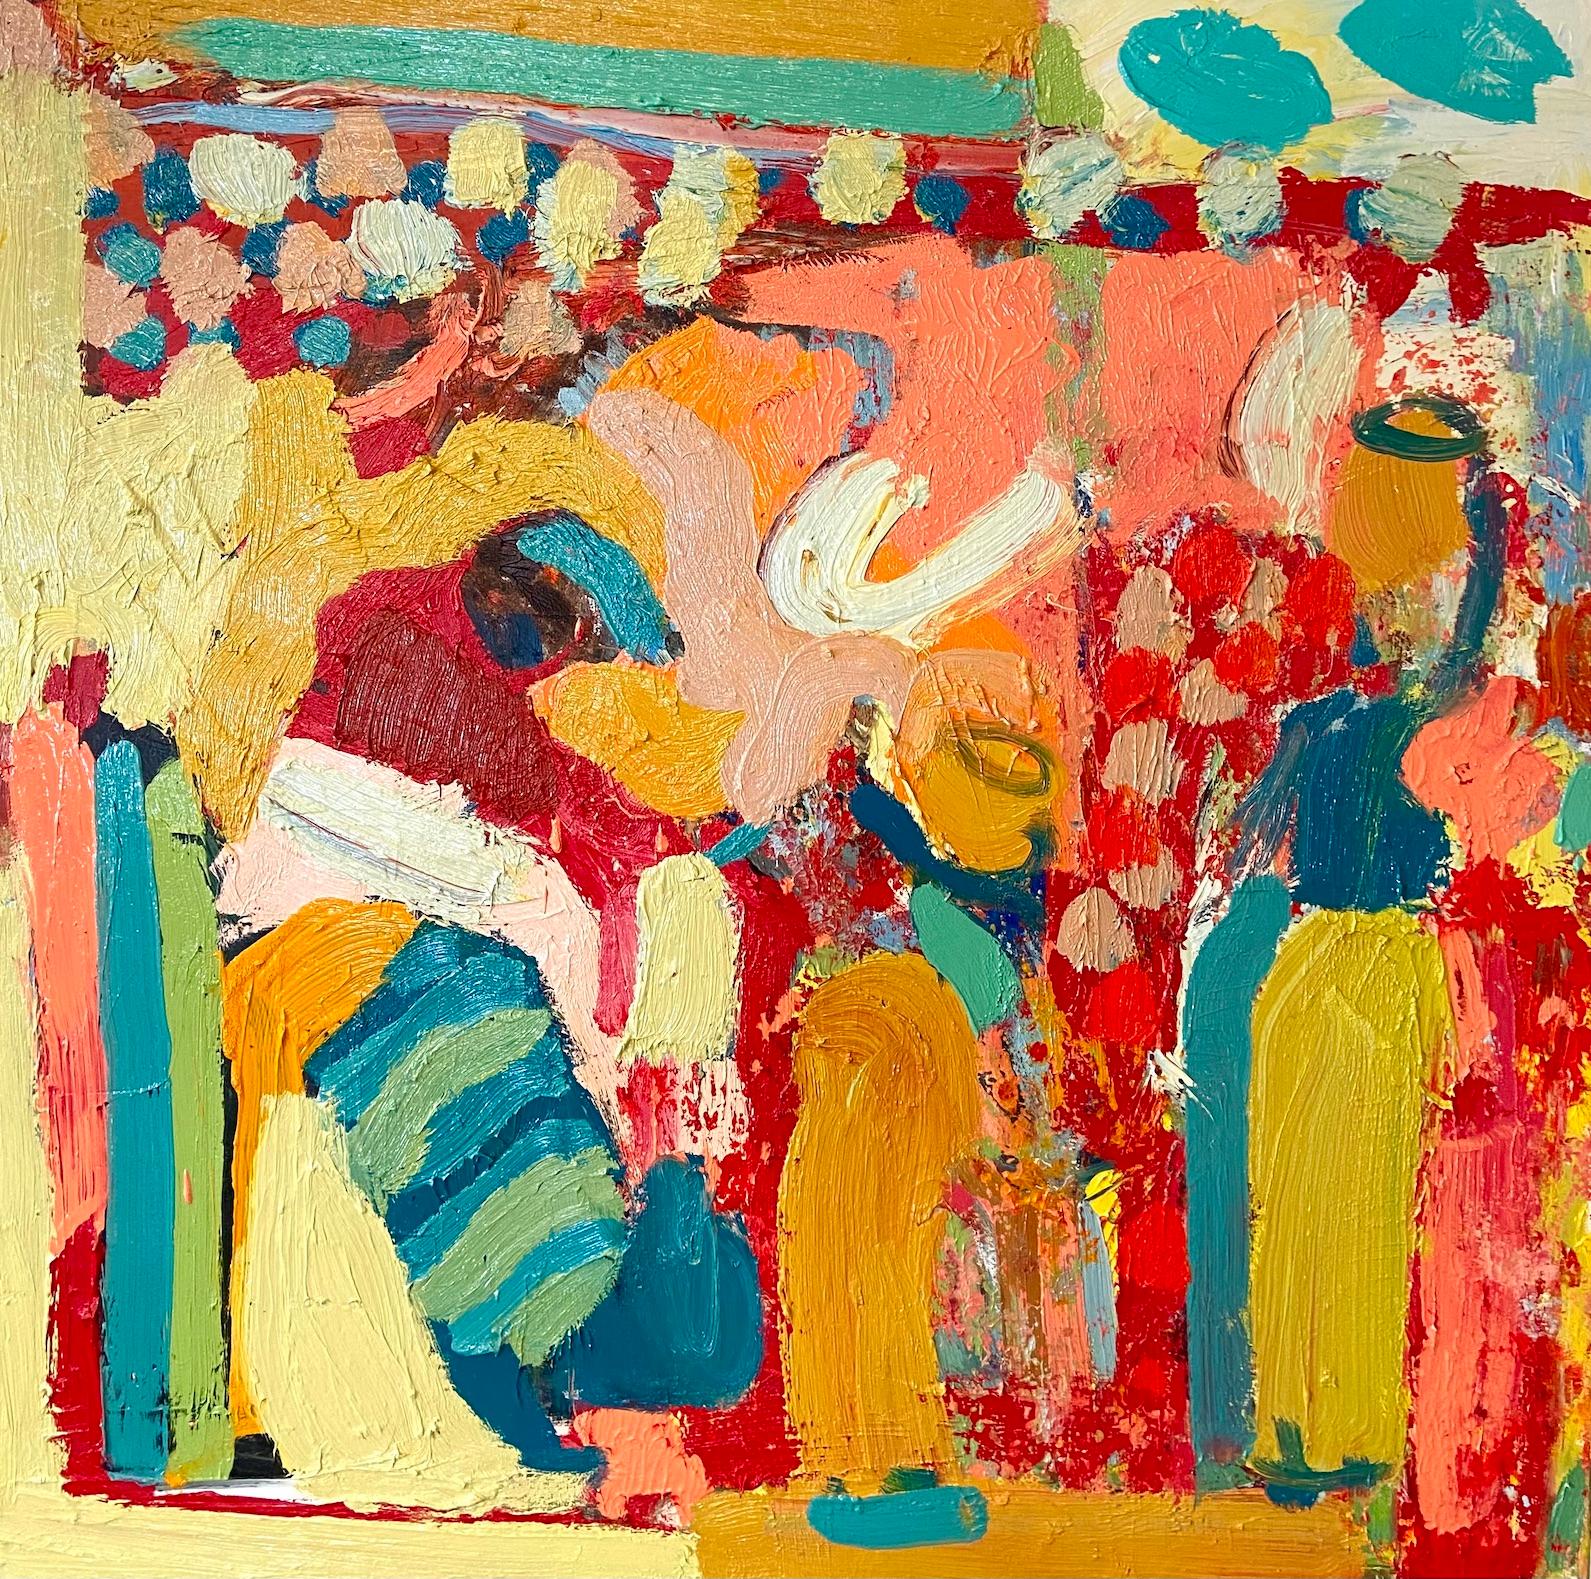 Abstract Painting Paul wadsworth - The Tailoring. Peinture à l'huile figurative contemporaine